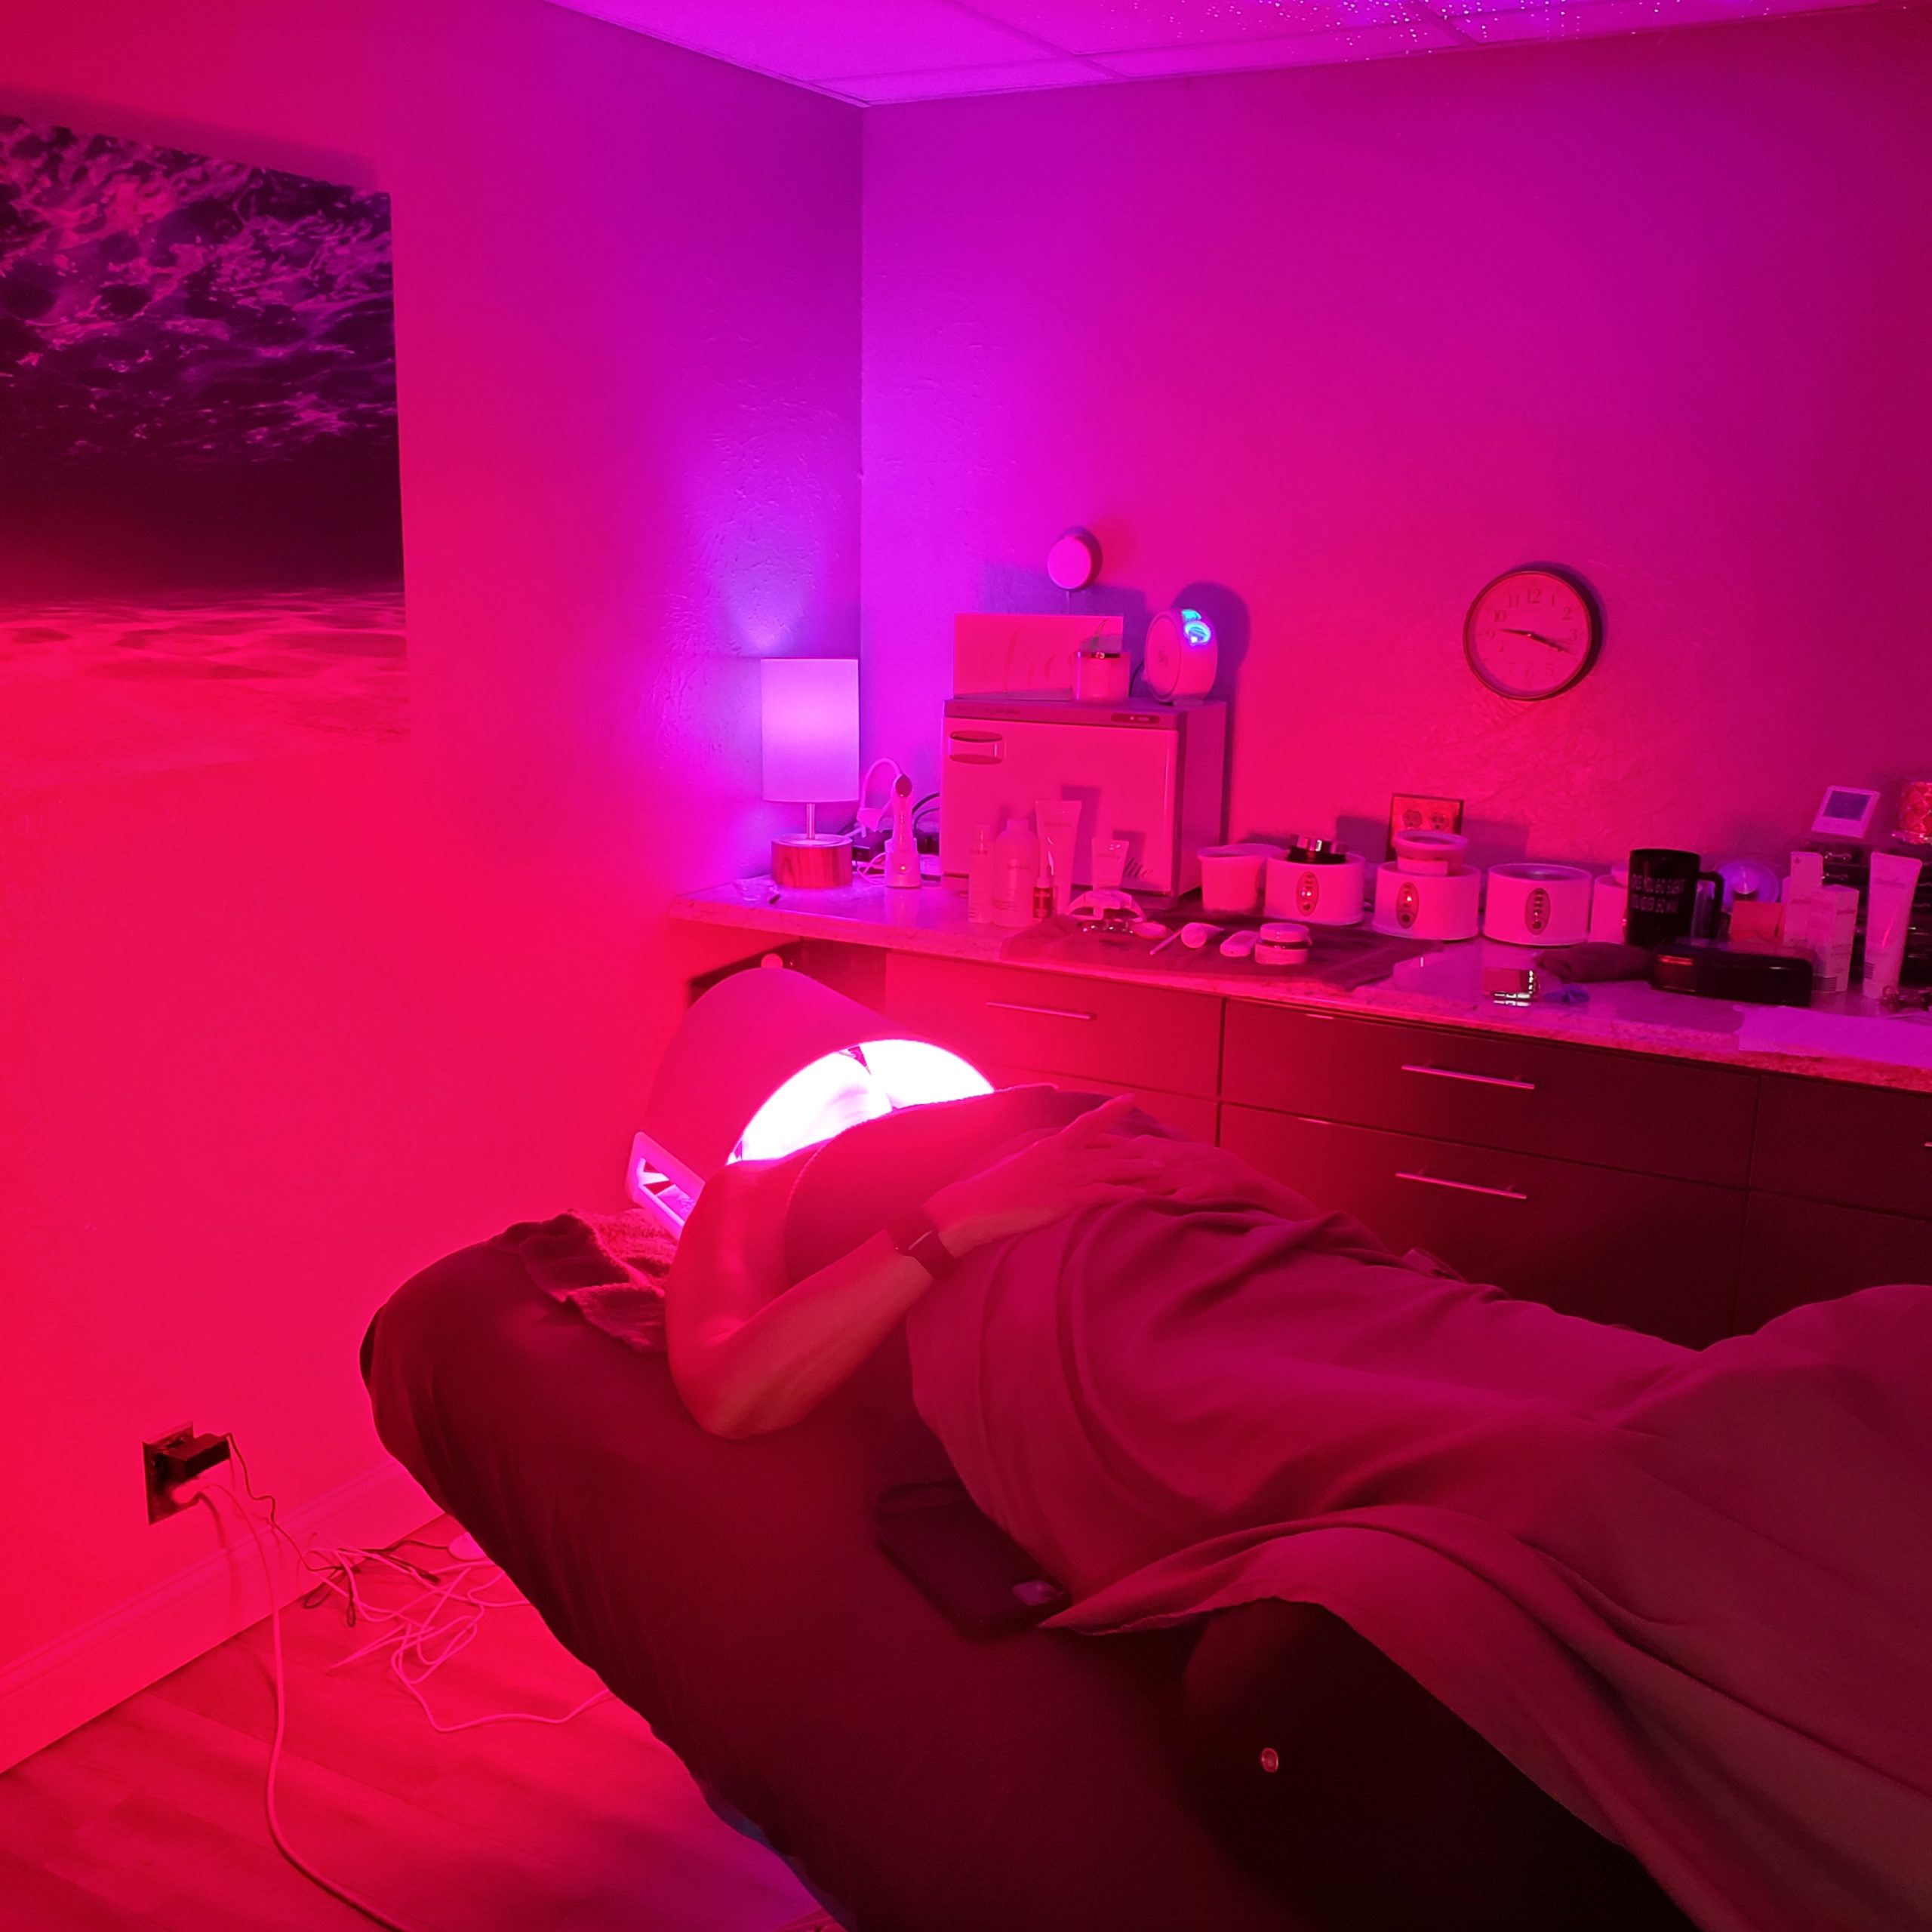 Effective Red Light Therapy for Psoriasis Treatment